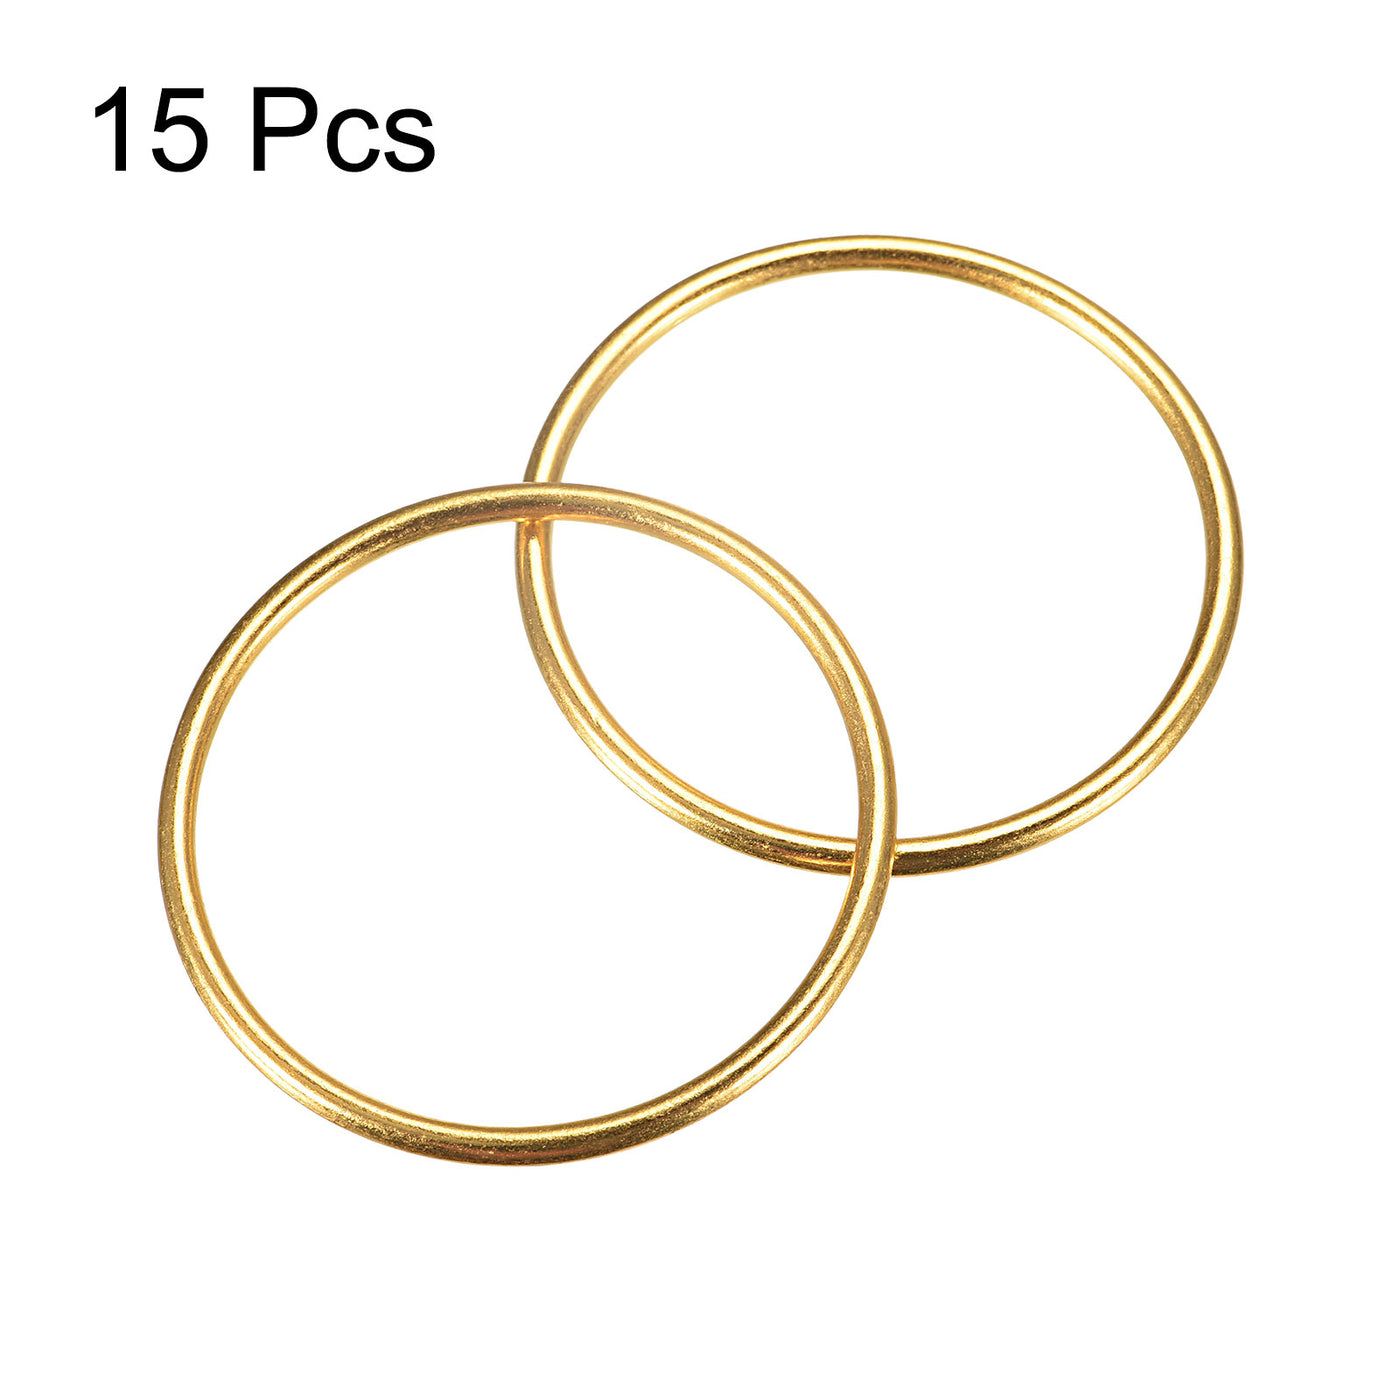 uxcell Uxcell Metal O Rings, 15pcs 50mm(1.97") ID 3mm Thick Welded O-Ringe, Gold Tone